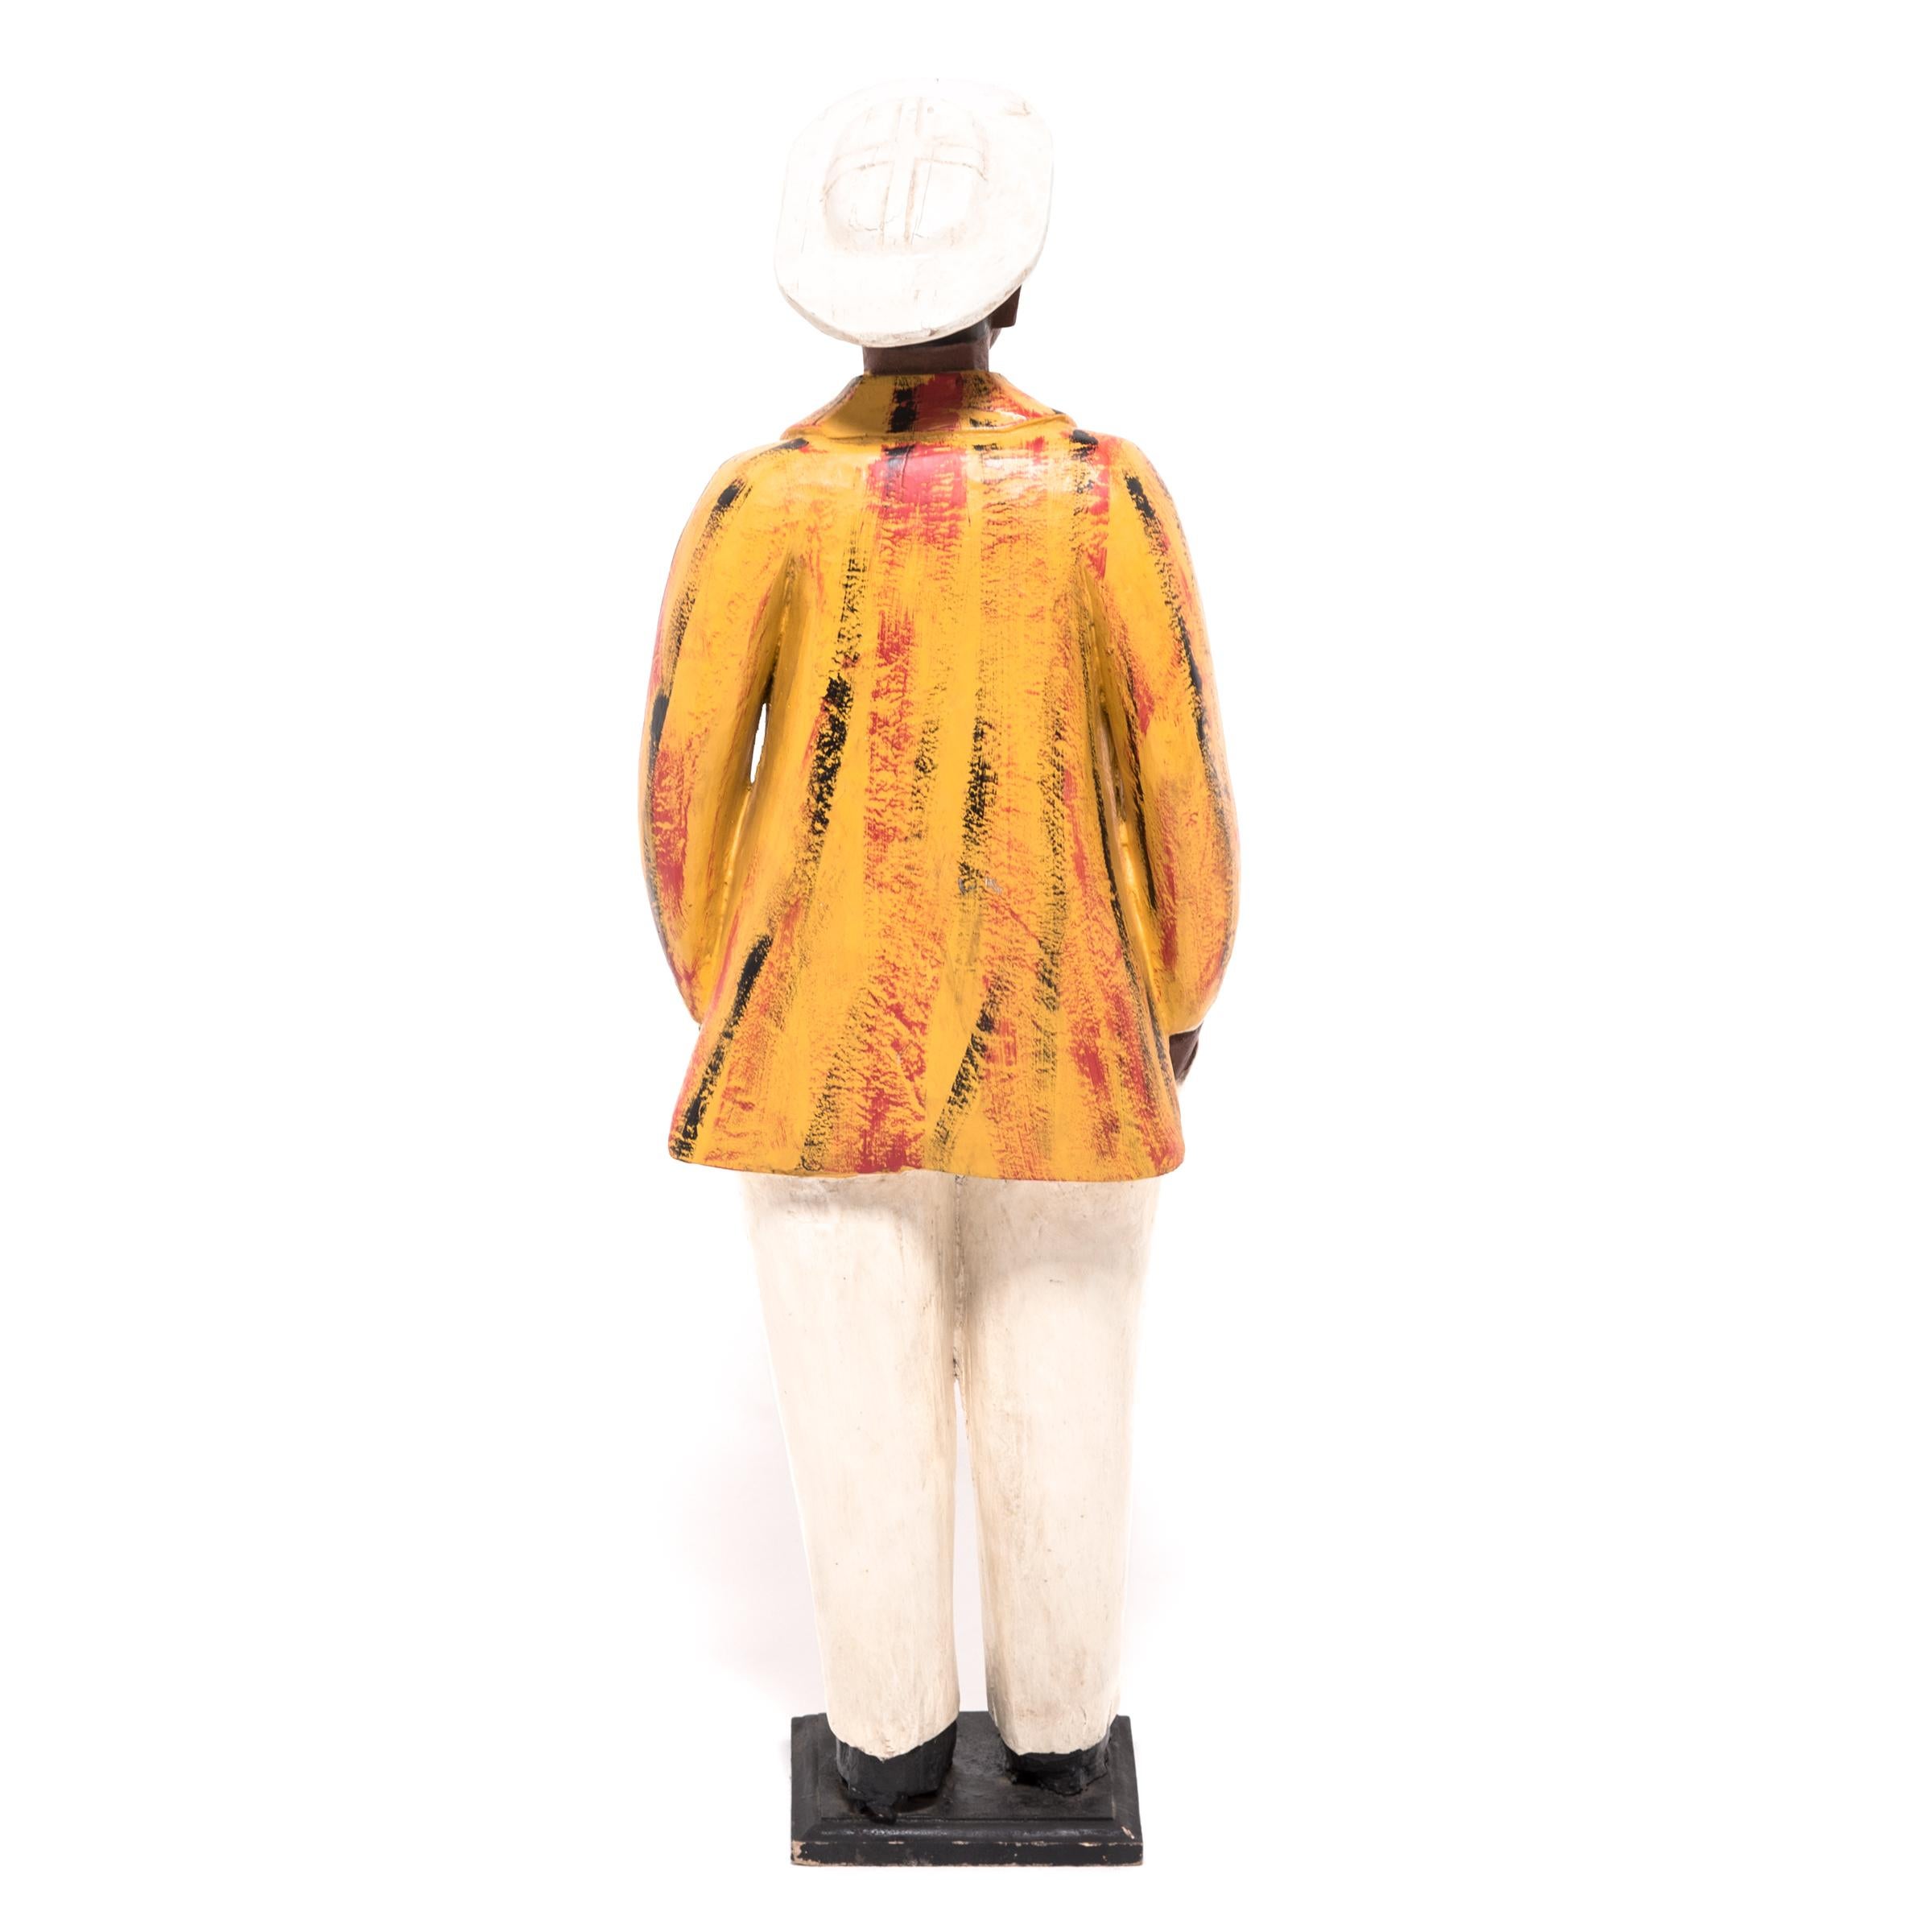 Ivorian African Colonial Figure with Yellow Jacket